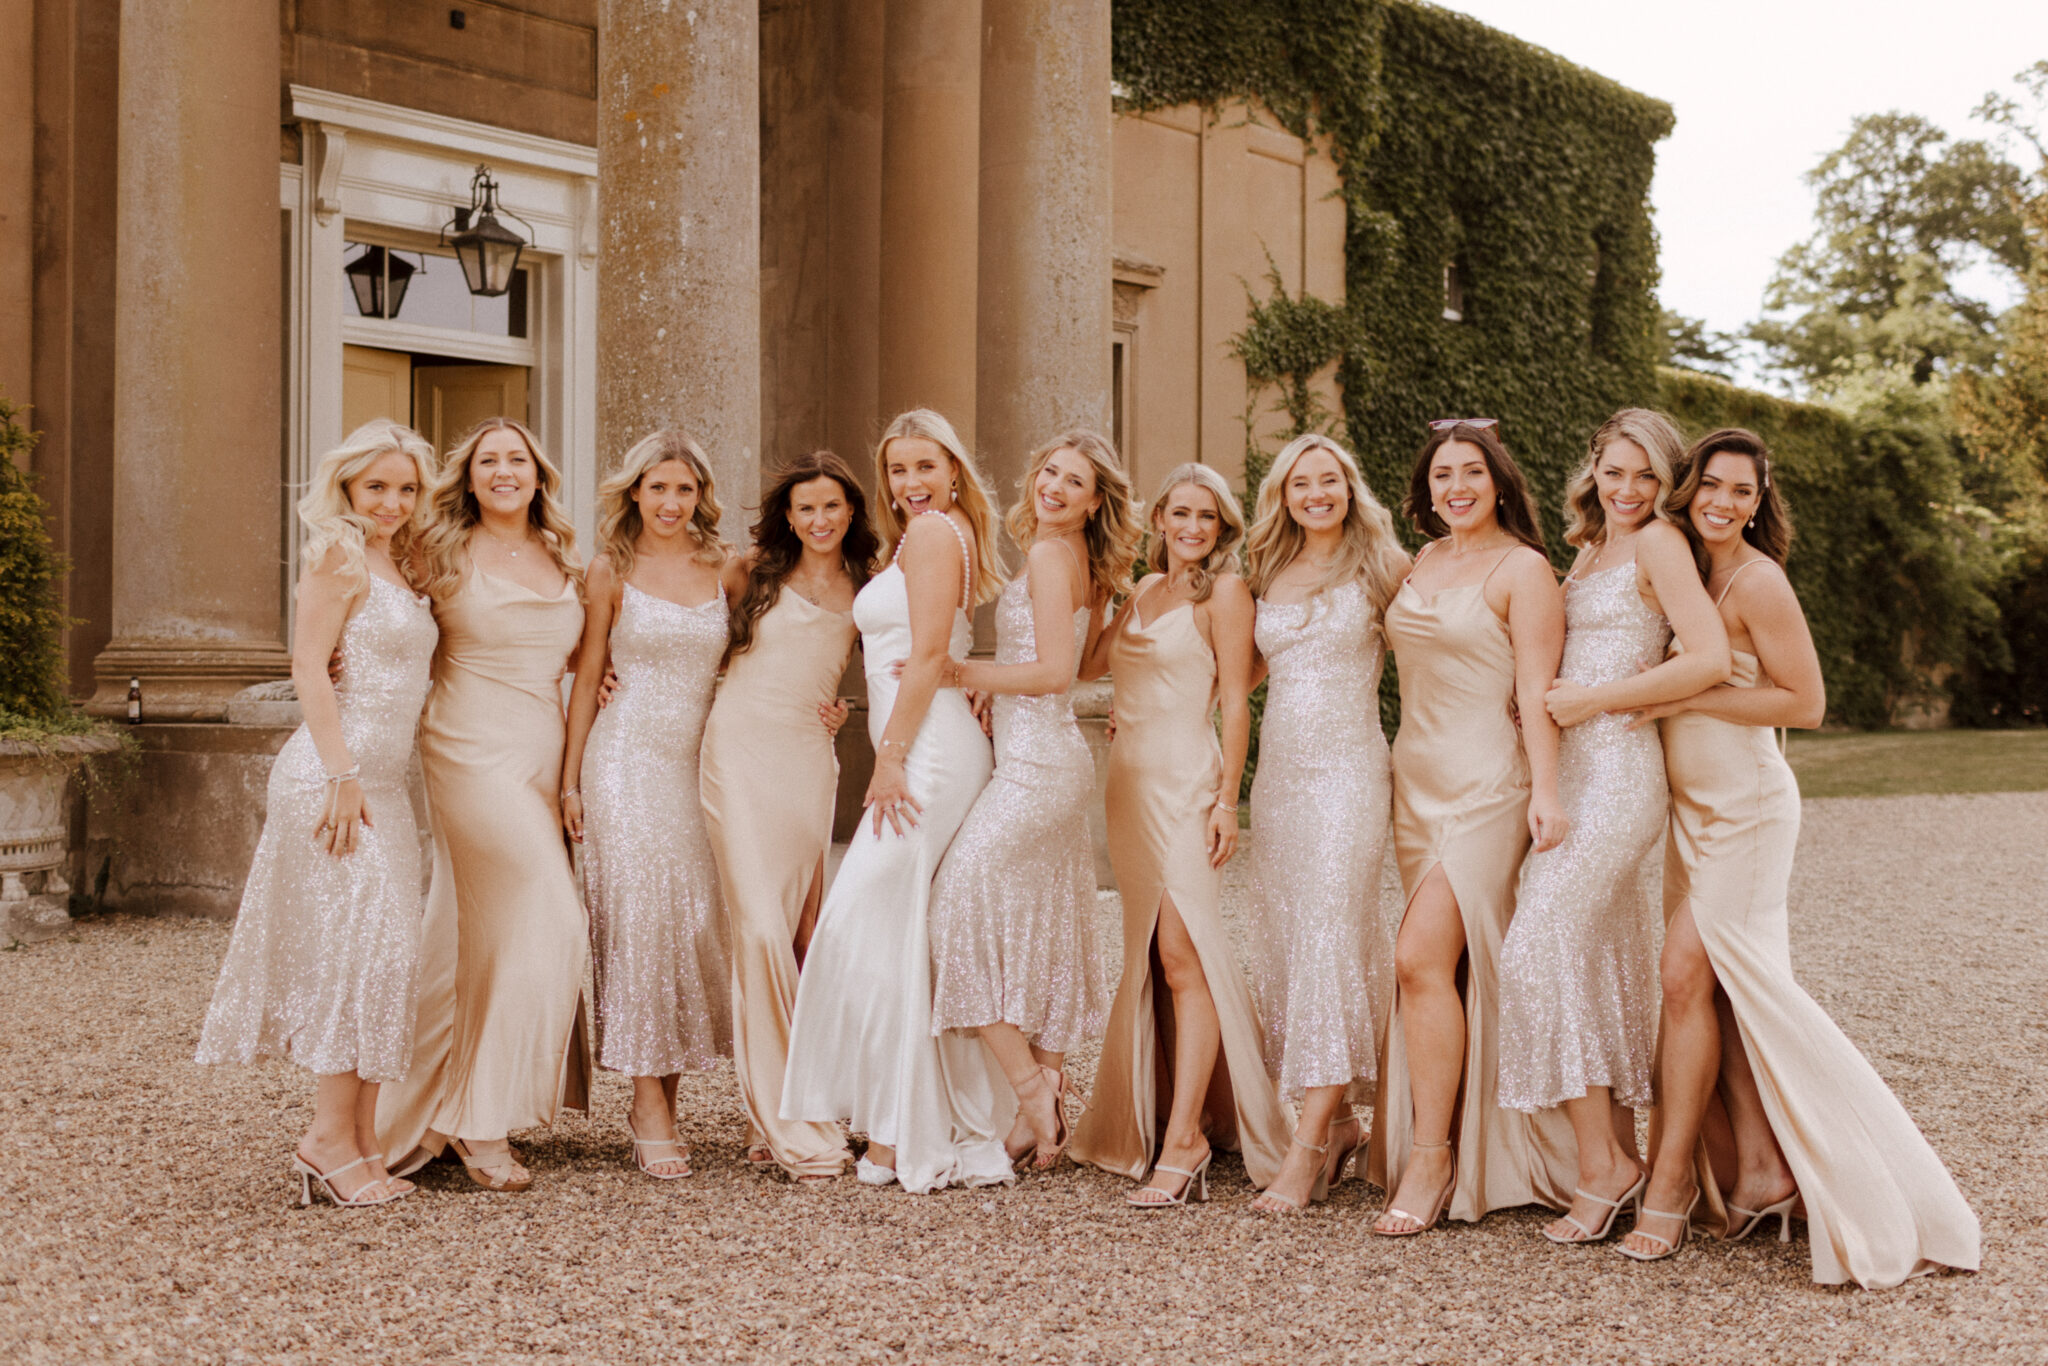 Bride with group of bridesmaids